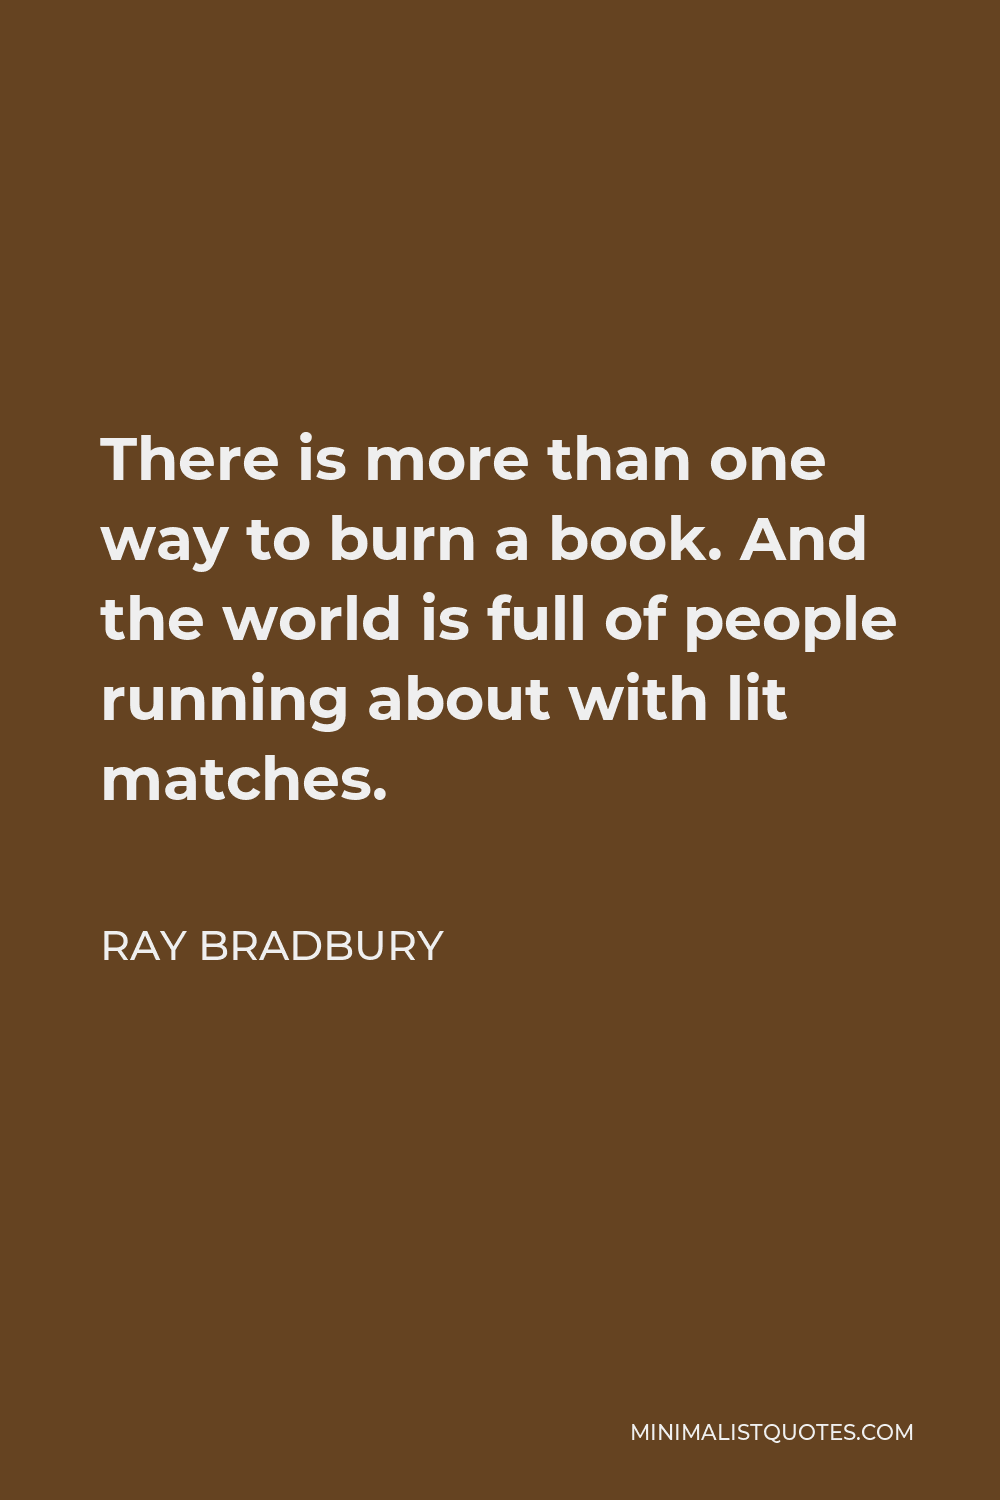 Ray Bradbury Quote - There is more than one way to burn a book. And the world is full of people running about with lit matches.